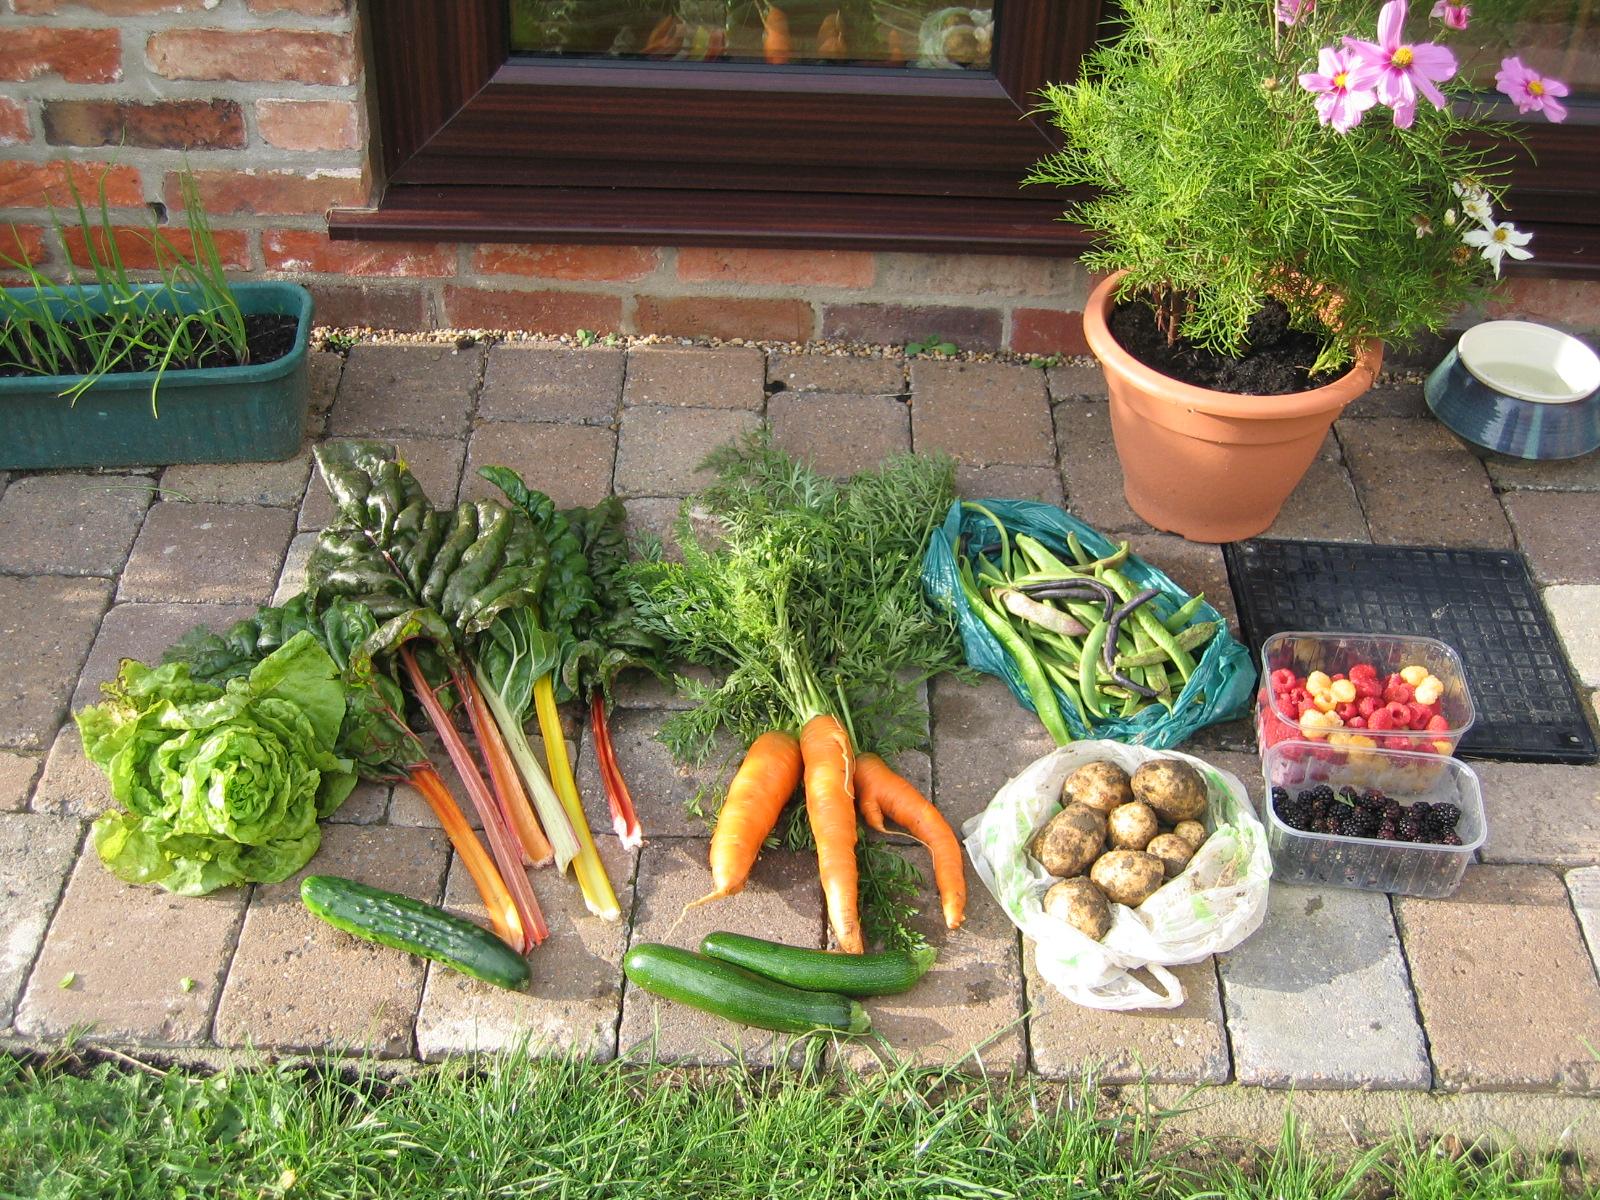 Photograph of allotment produce